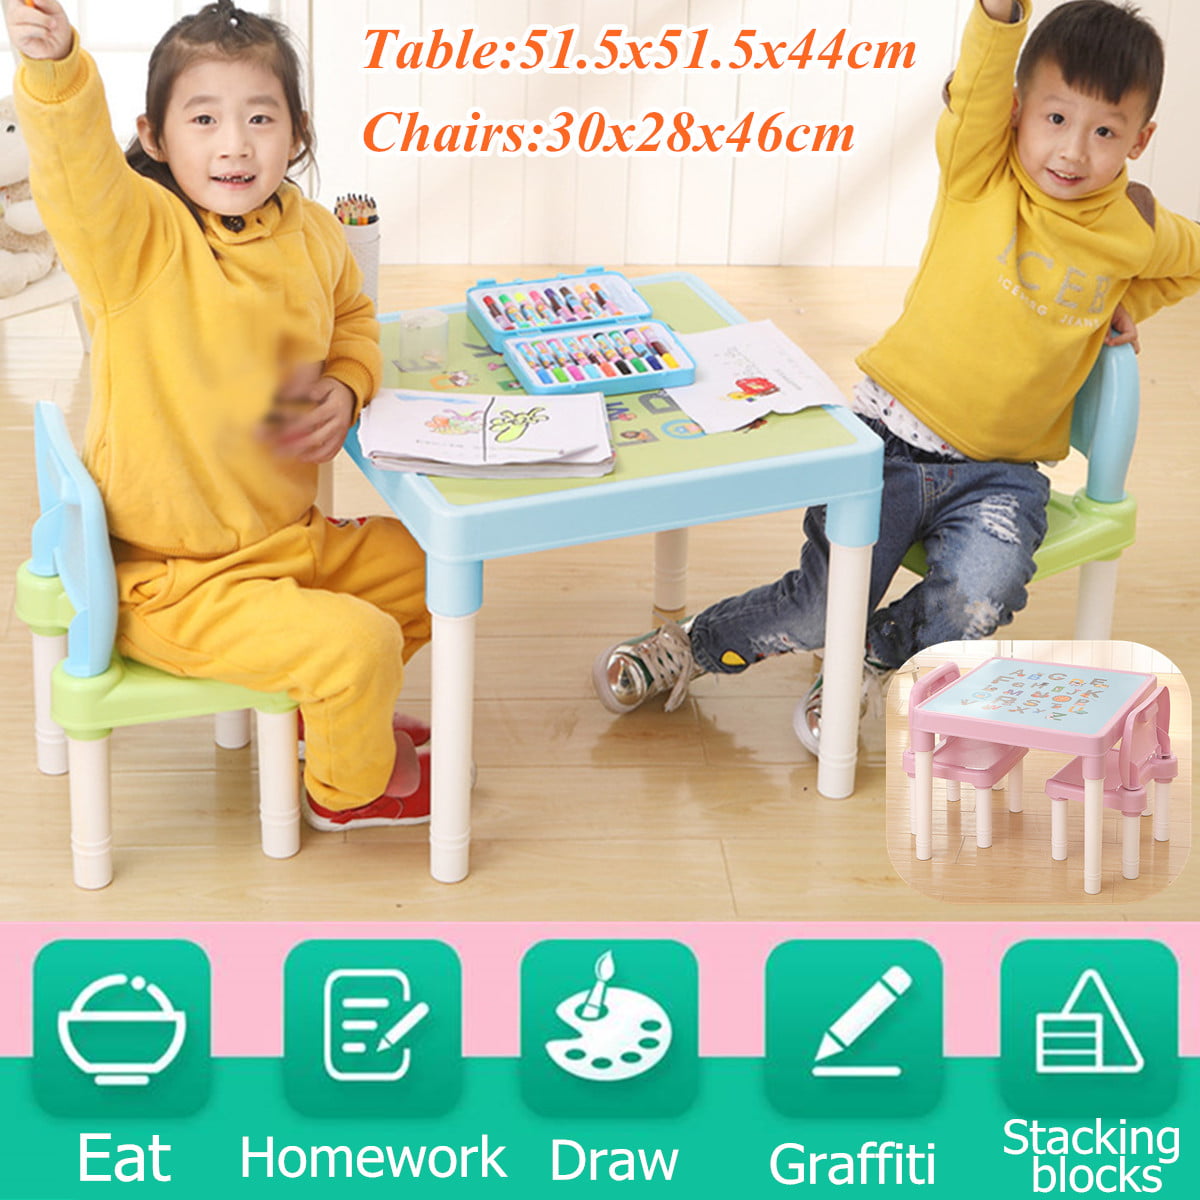 Kids Desk And Chair Set Children's Table Set 3-Piece Blue Printing Table And Chairs Set Kids Learning Alphabet Study Table For Above 2 years old